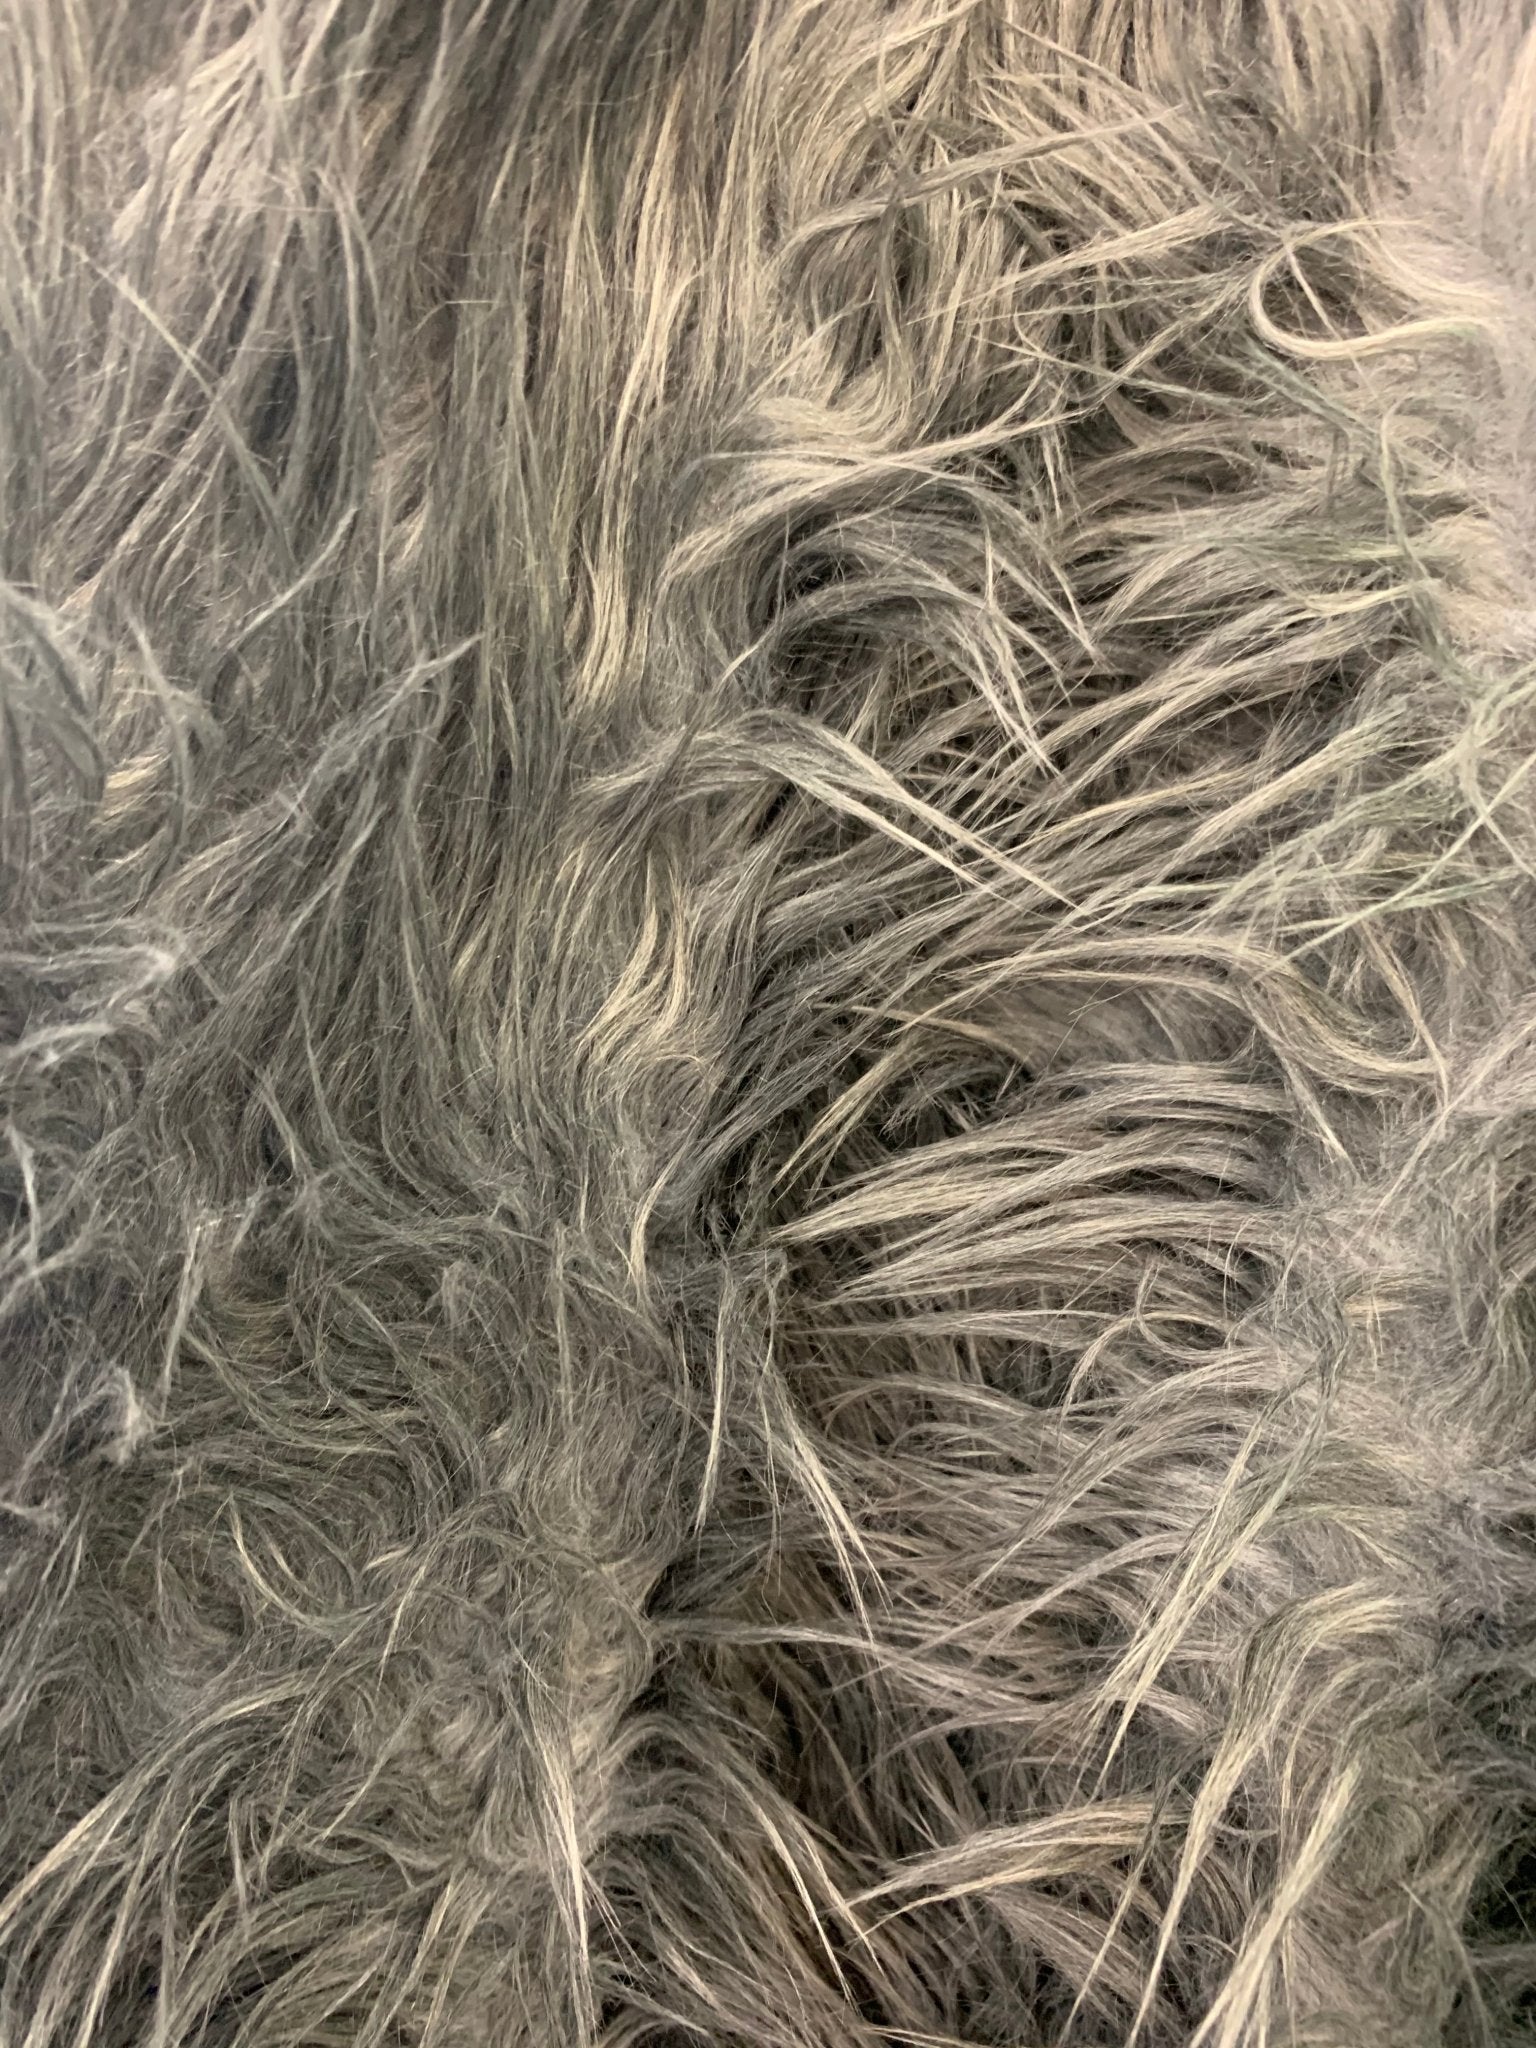 Mongolian Long Pile Fake Faux Fur Fabric Sold By The YardICEFABRICICE FABRICSGrayBy The Yard (60 inches Wide)Mongolian Long Pile Fake Faux Fur Fabric Sold By The Yard ICEFABRIC